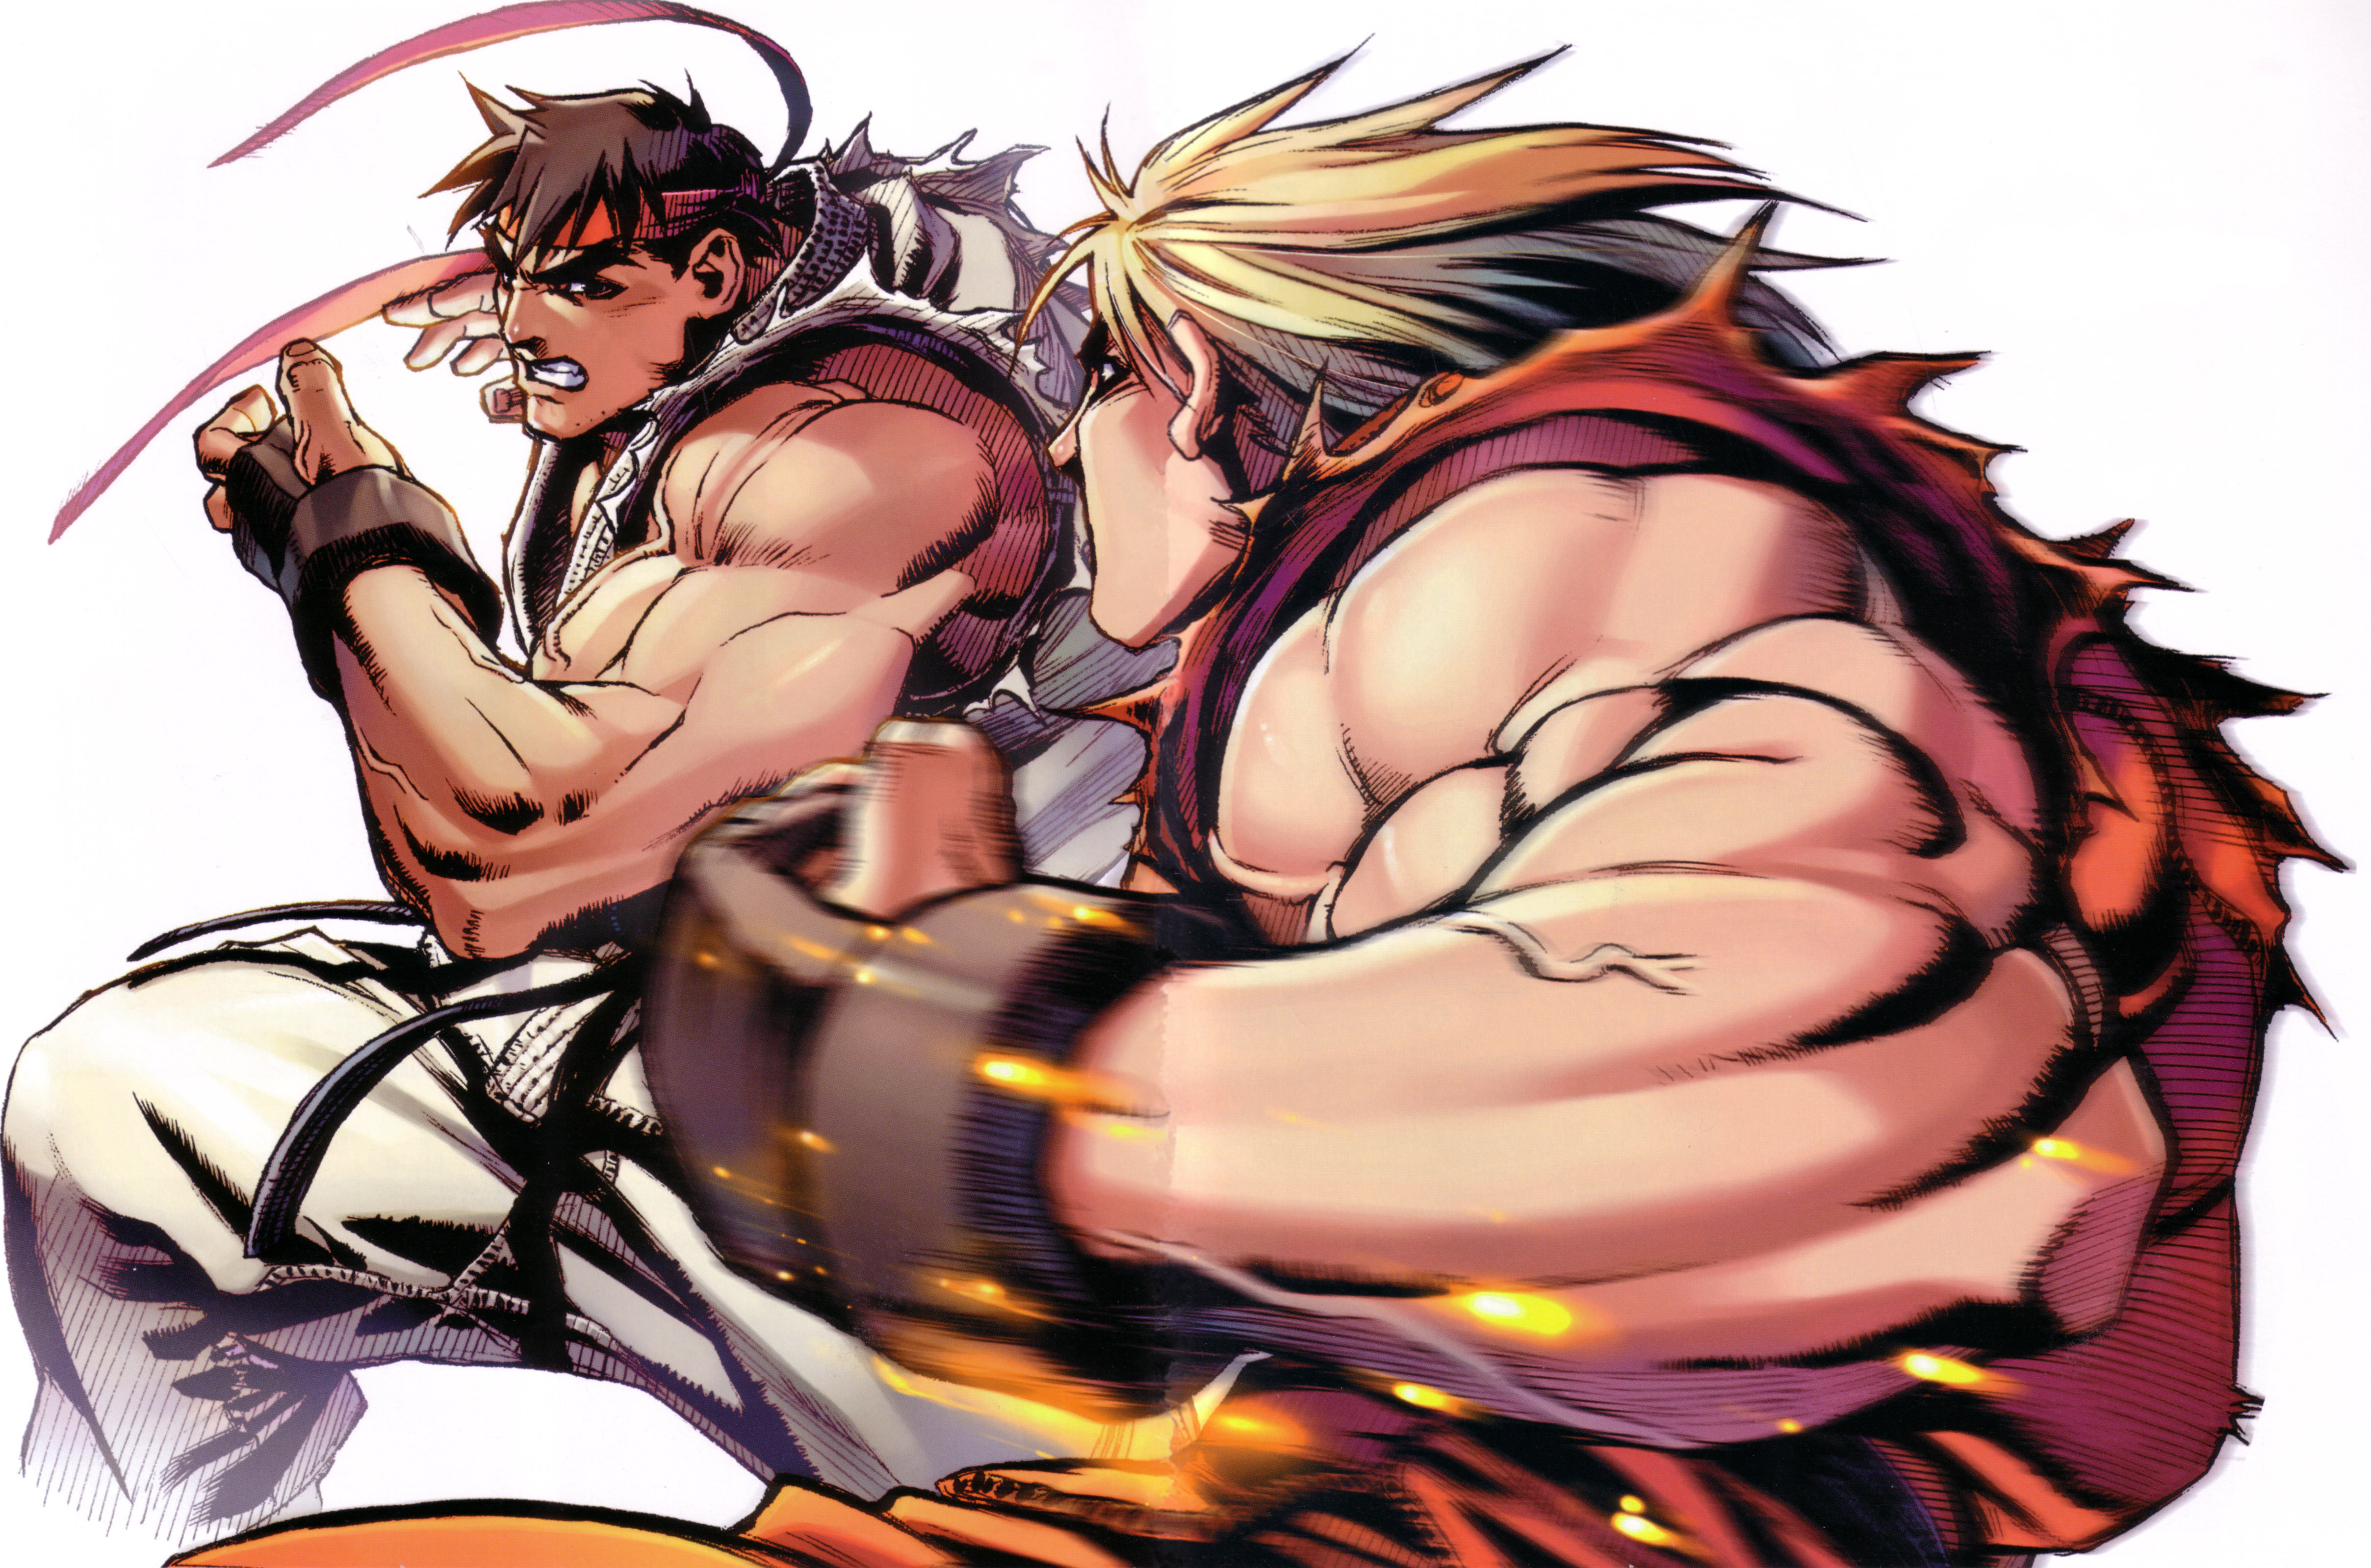 Video Game Street Fighter HD Wallpaper | Background Image